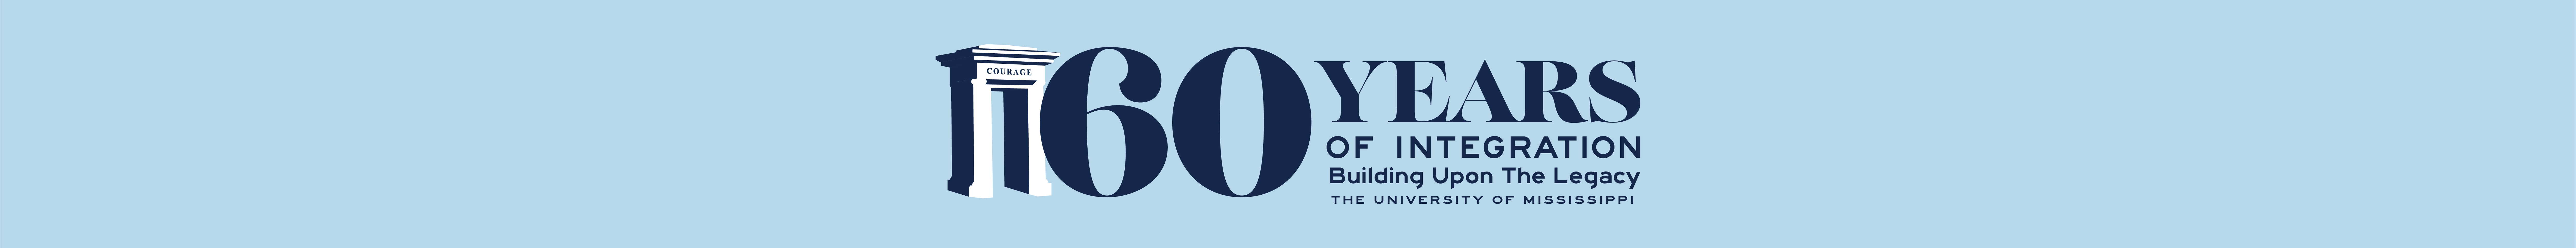 60 Years of Integration: Building Upon The Legacy